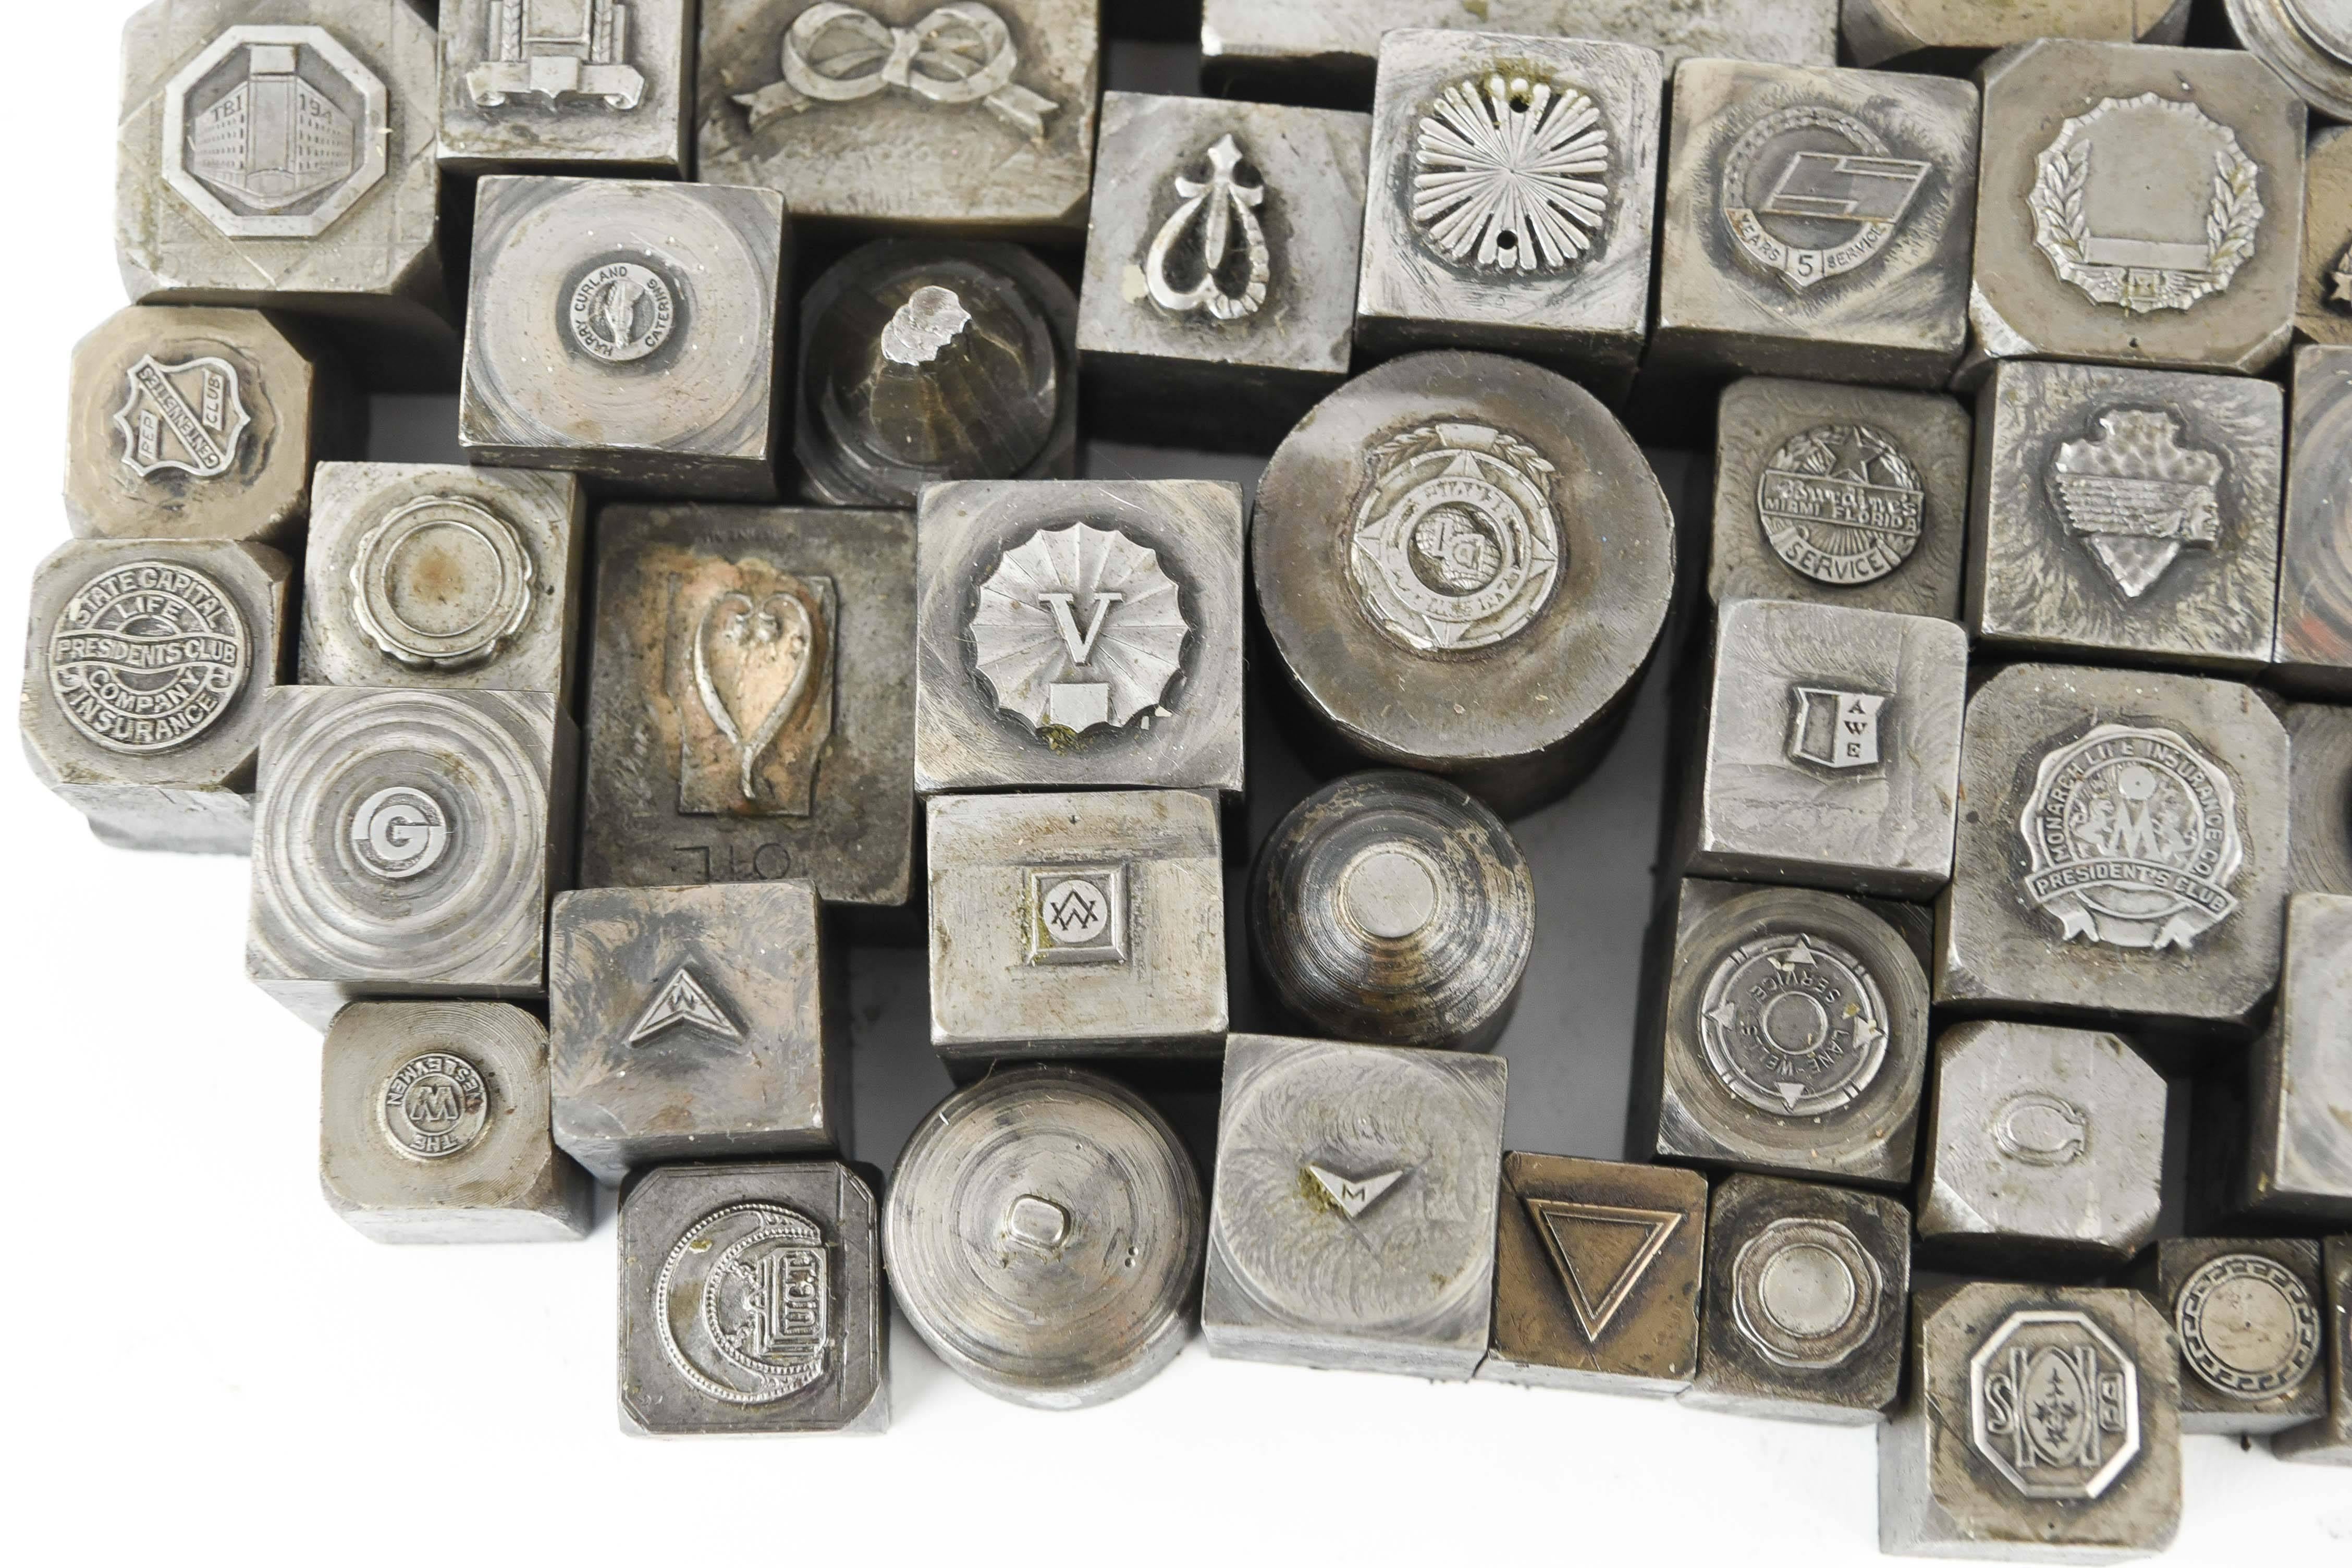 Antique solid steel alloy stamps from a press that made jewelry like tie tacks and pins etc.